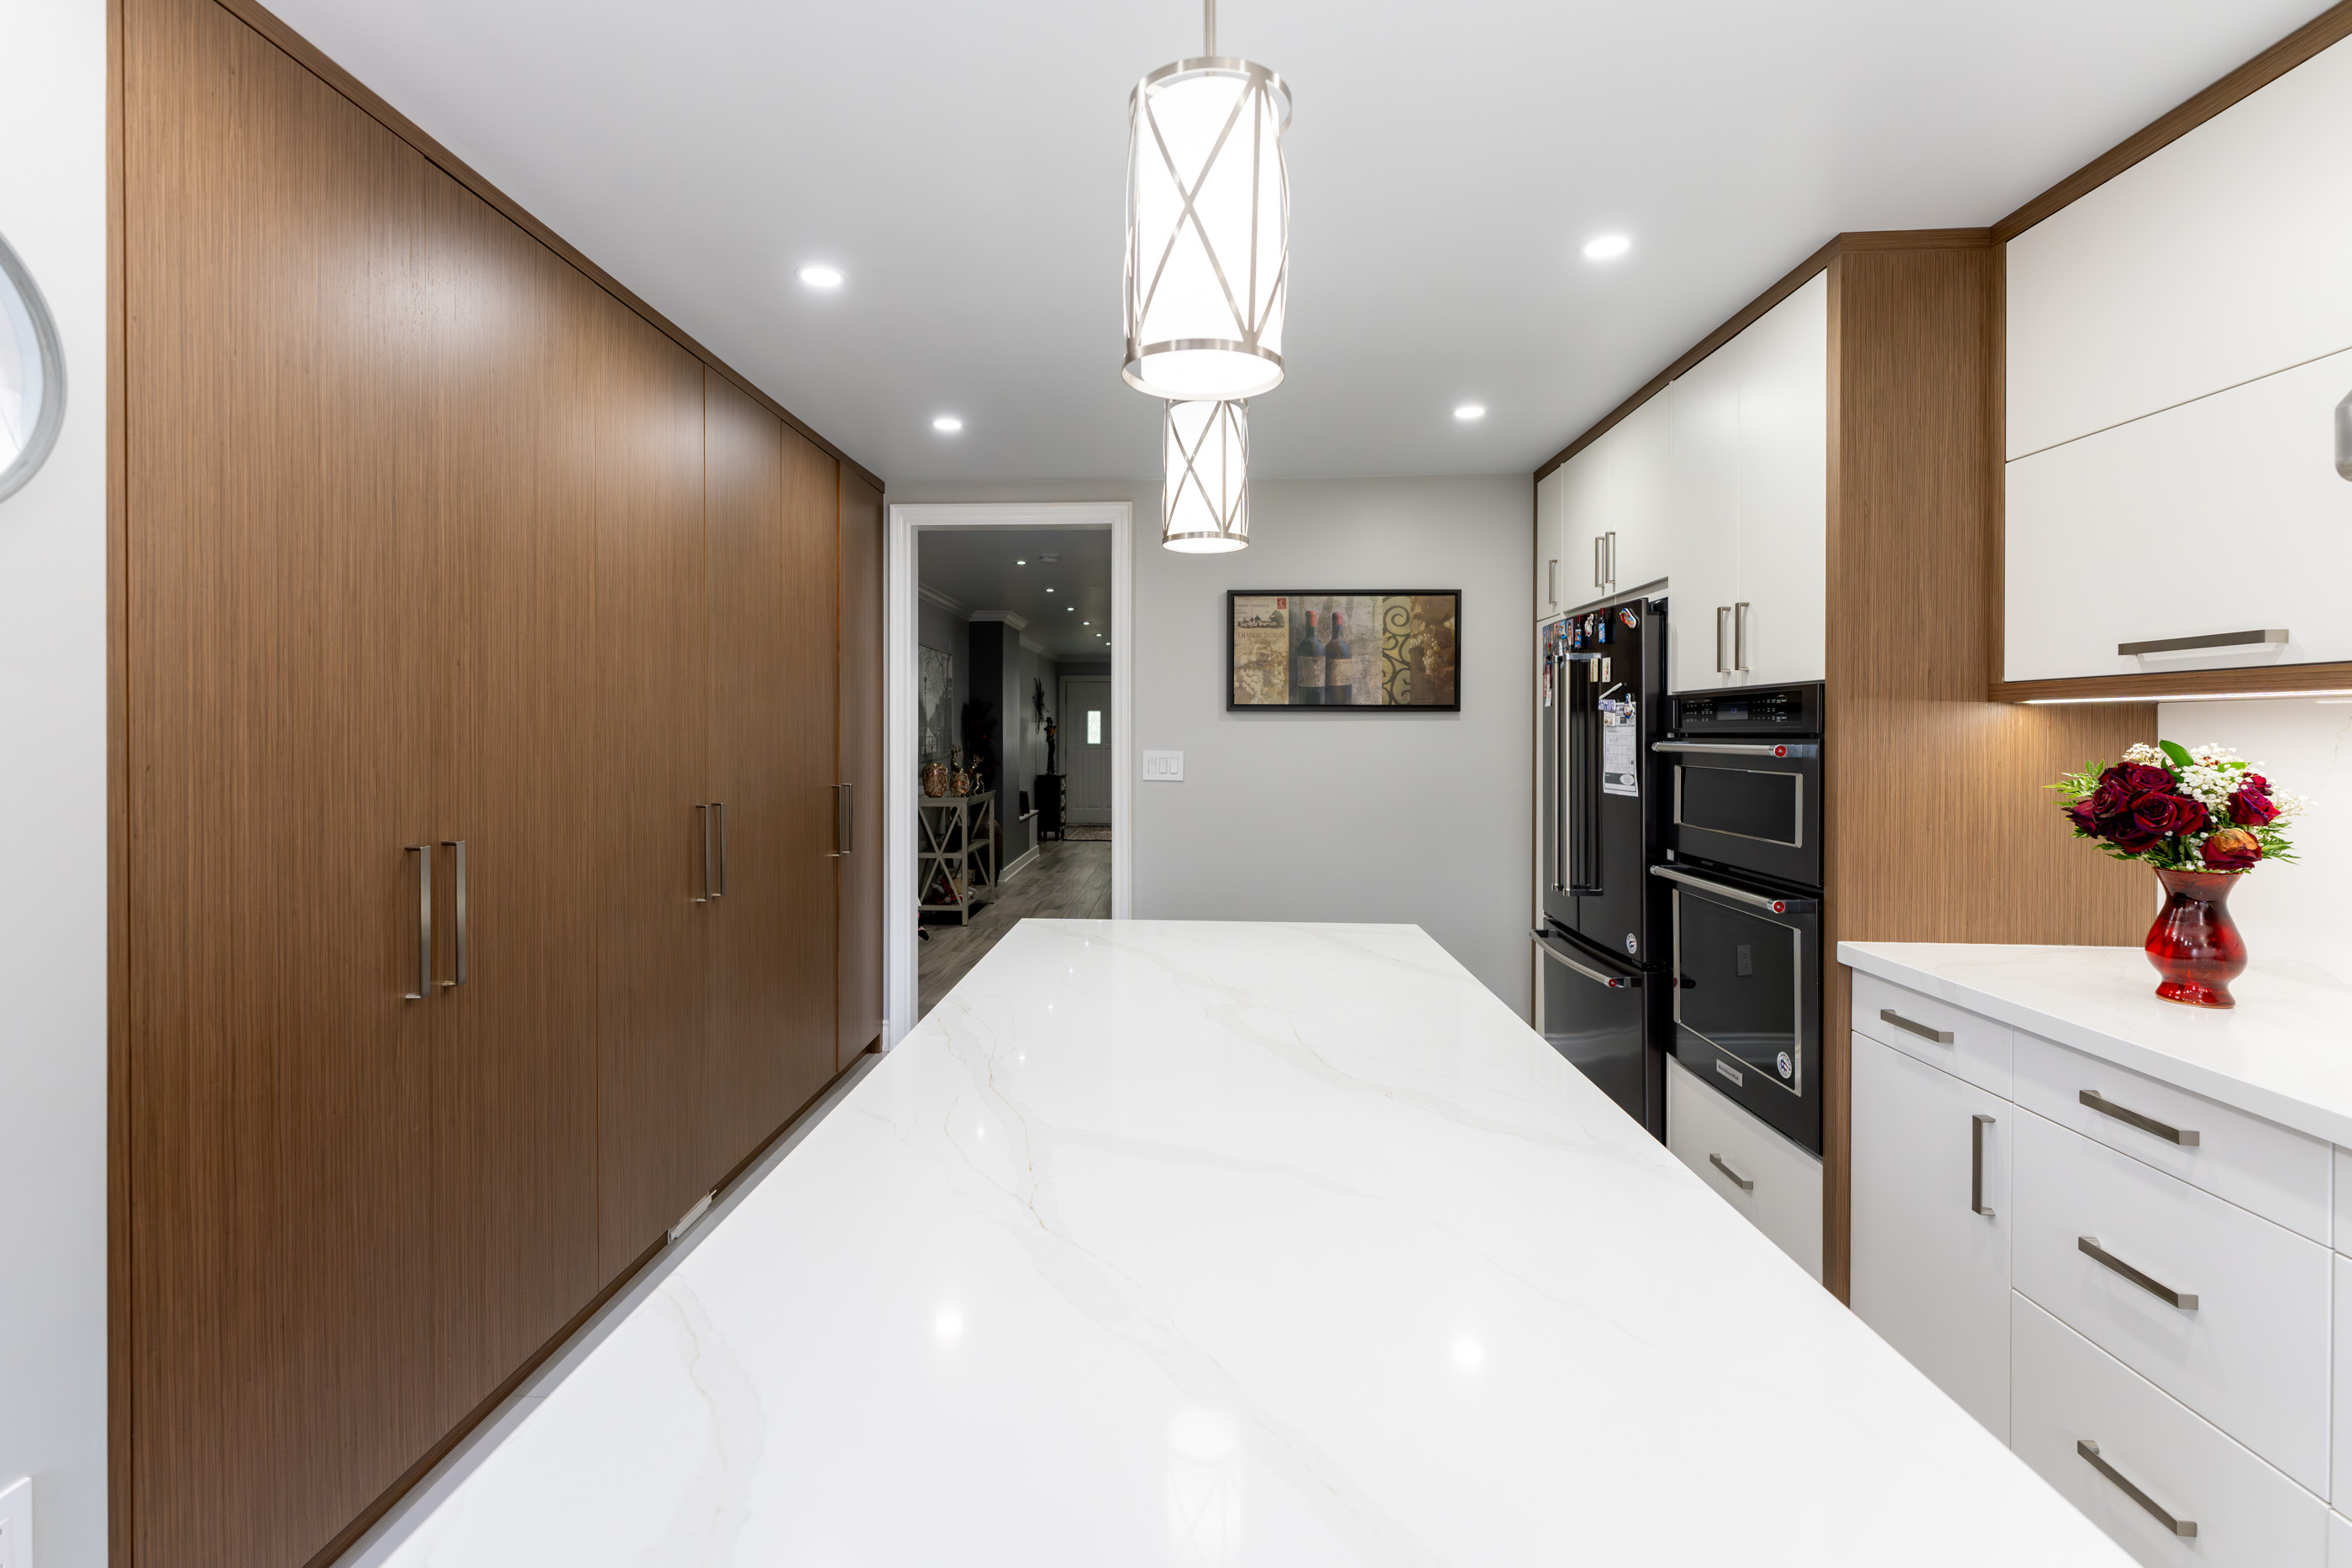 Modern cabinetry